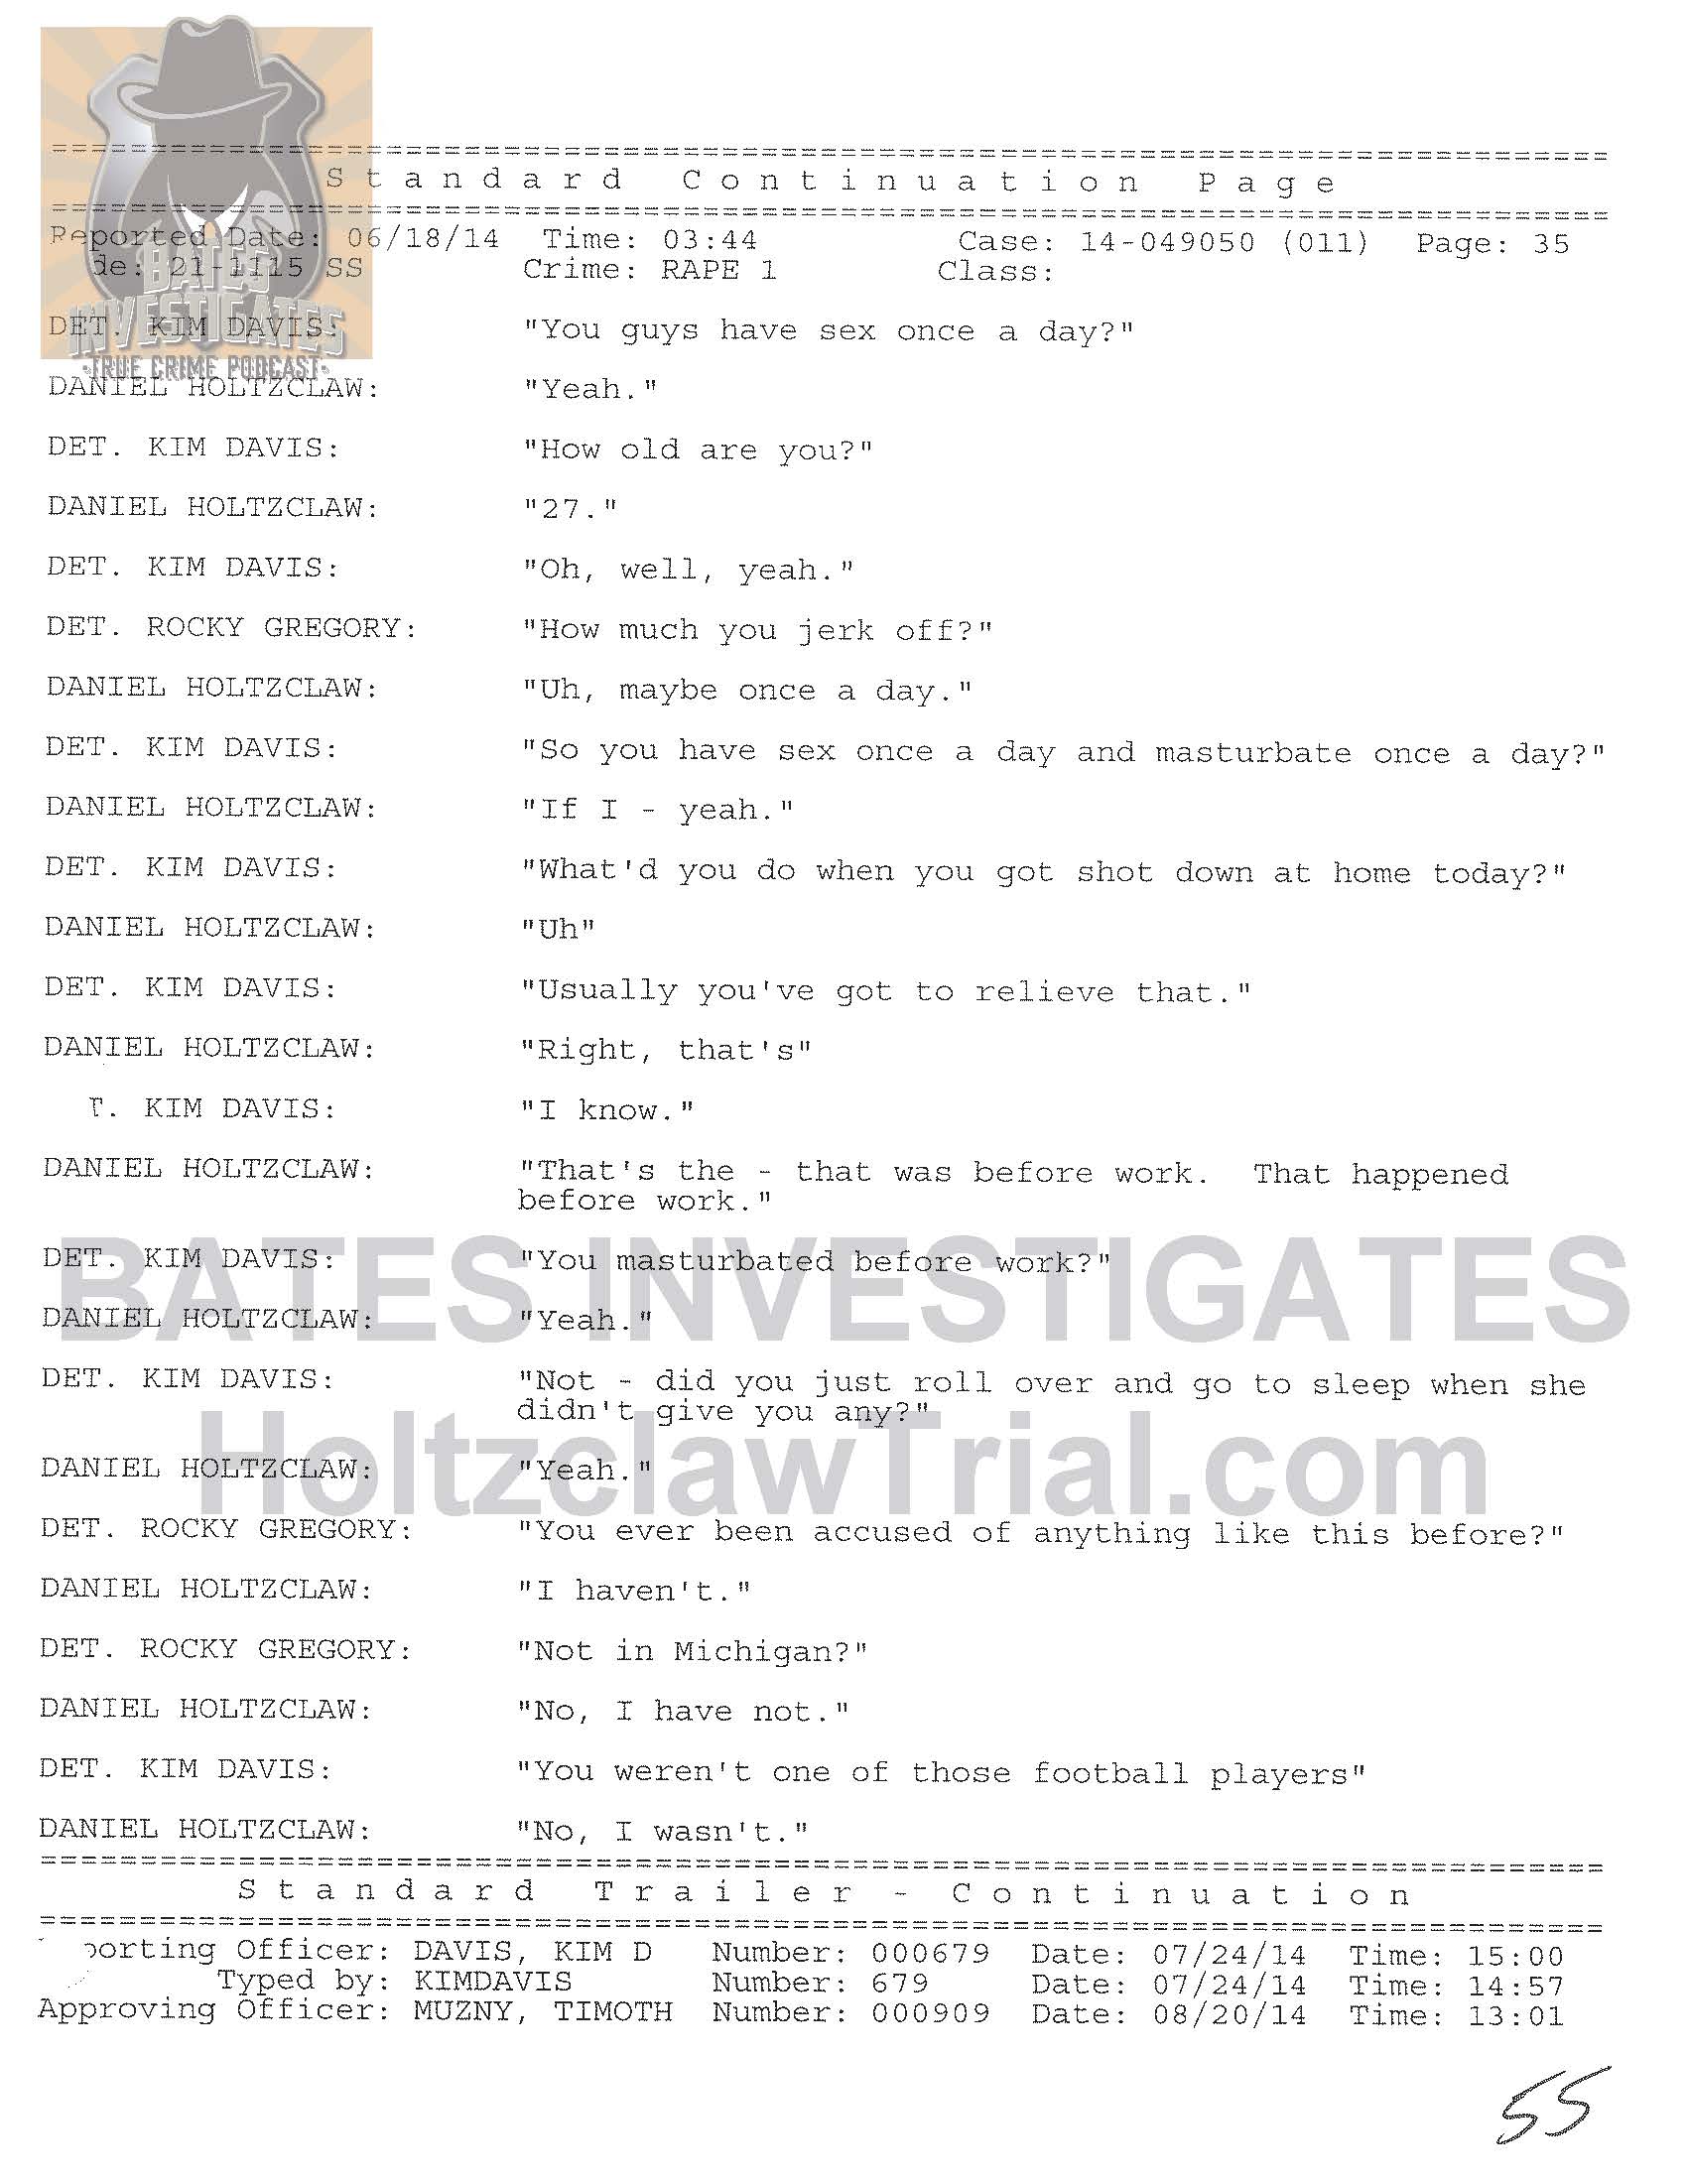 Holtzclaw Interrogation Transcript - Ep02 Redacted_Page_35.jpg